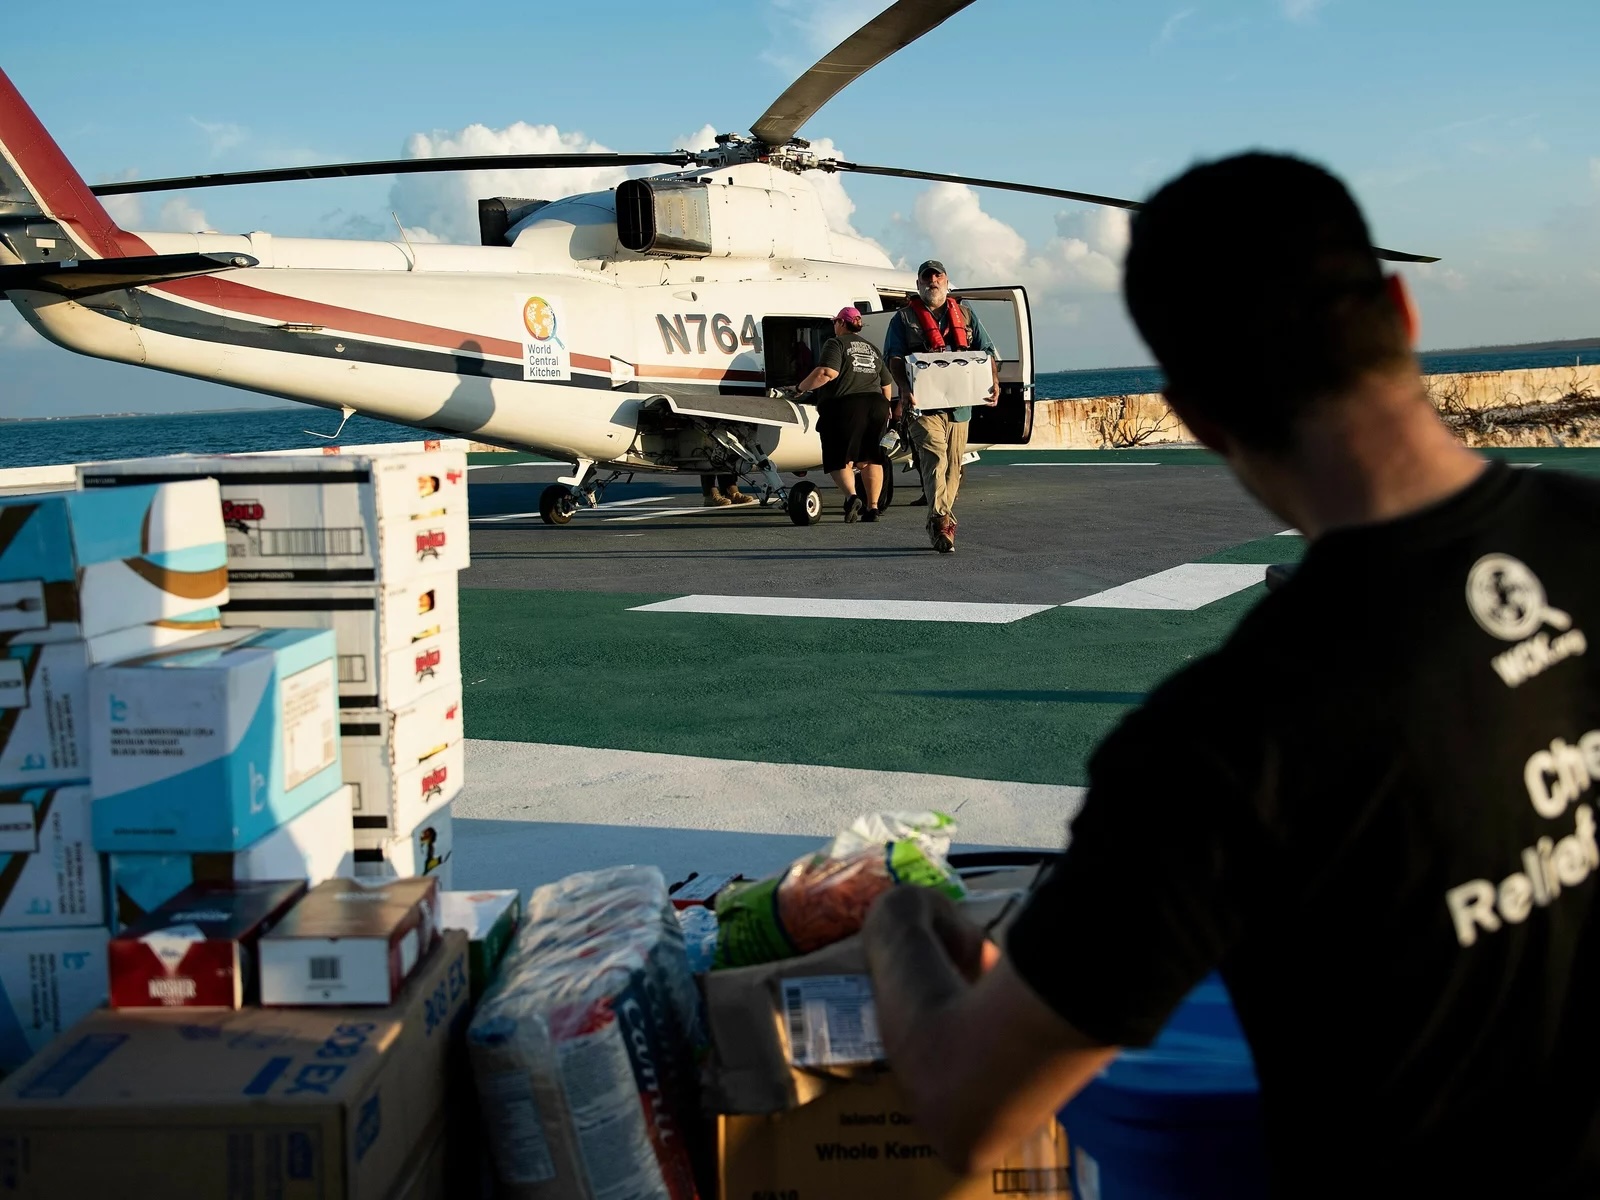 A white helicopter on a tarmac with people taking cases and boxes out of it, and another peron in foreground arranging boxes of food and supplies.